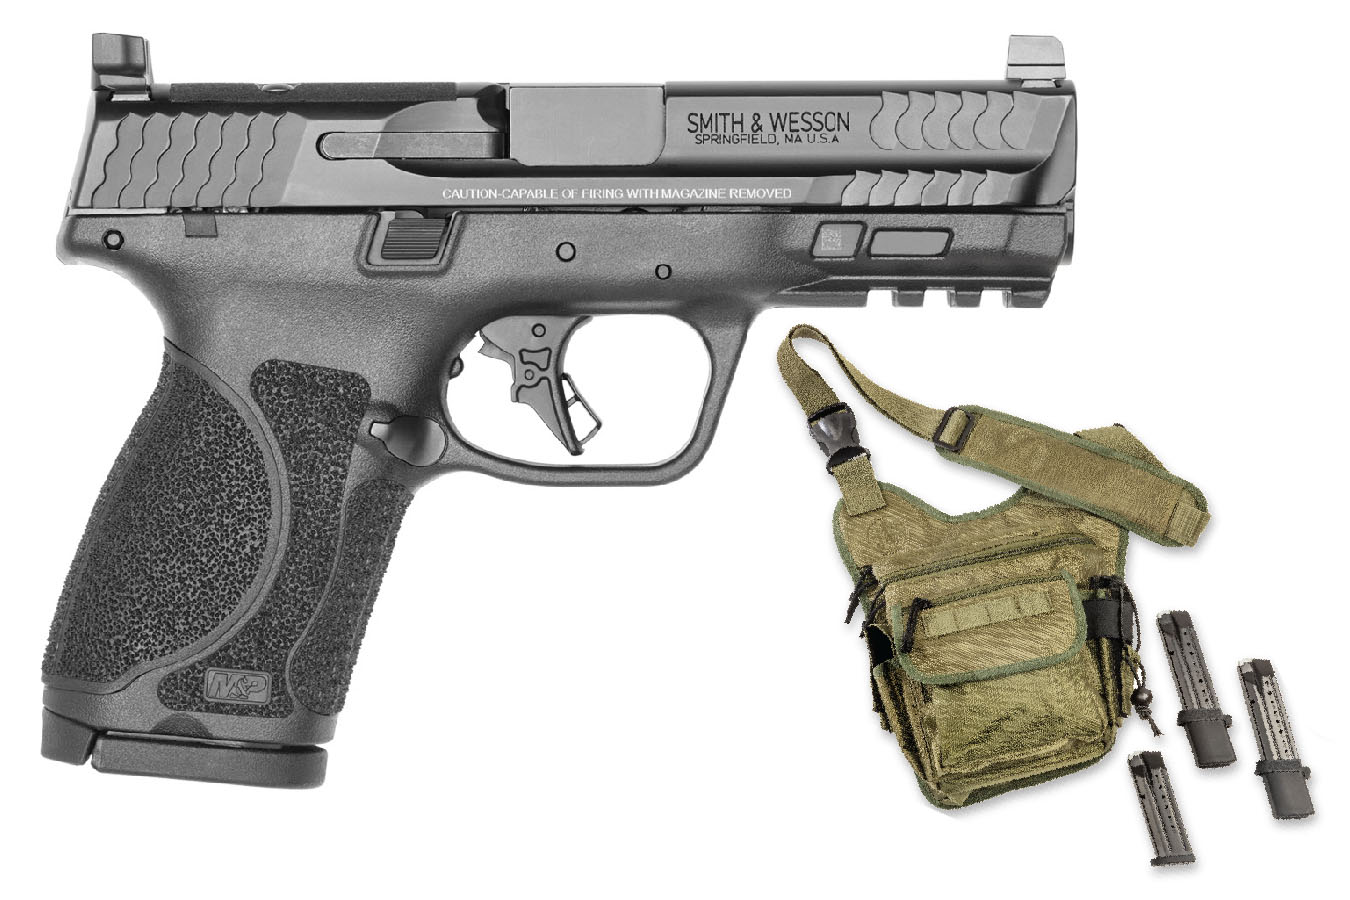 MP9 M2.0 COMPACT 9MM BUG OUT BUNDLE 2-23RND MAGS